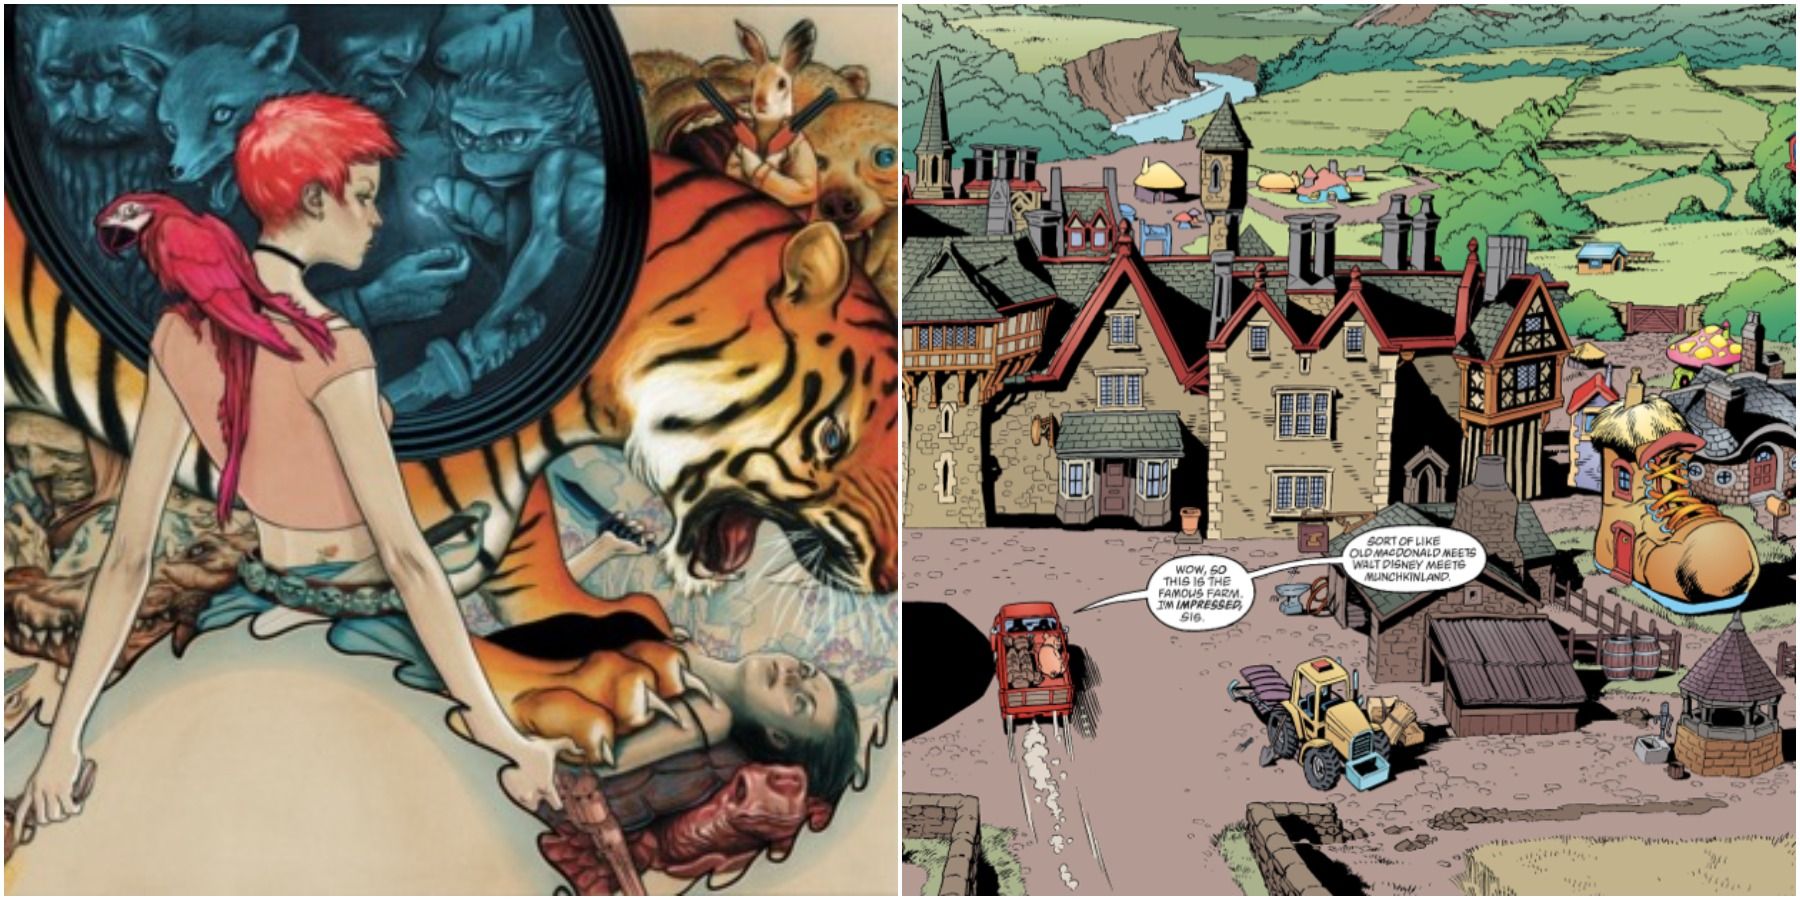 Split image of Fables cover and the Farm.